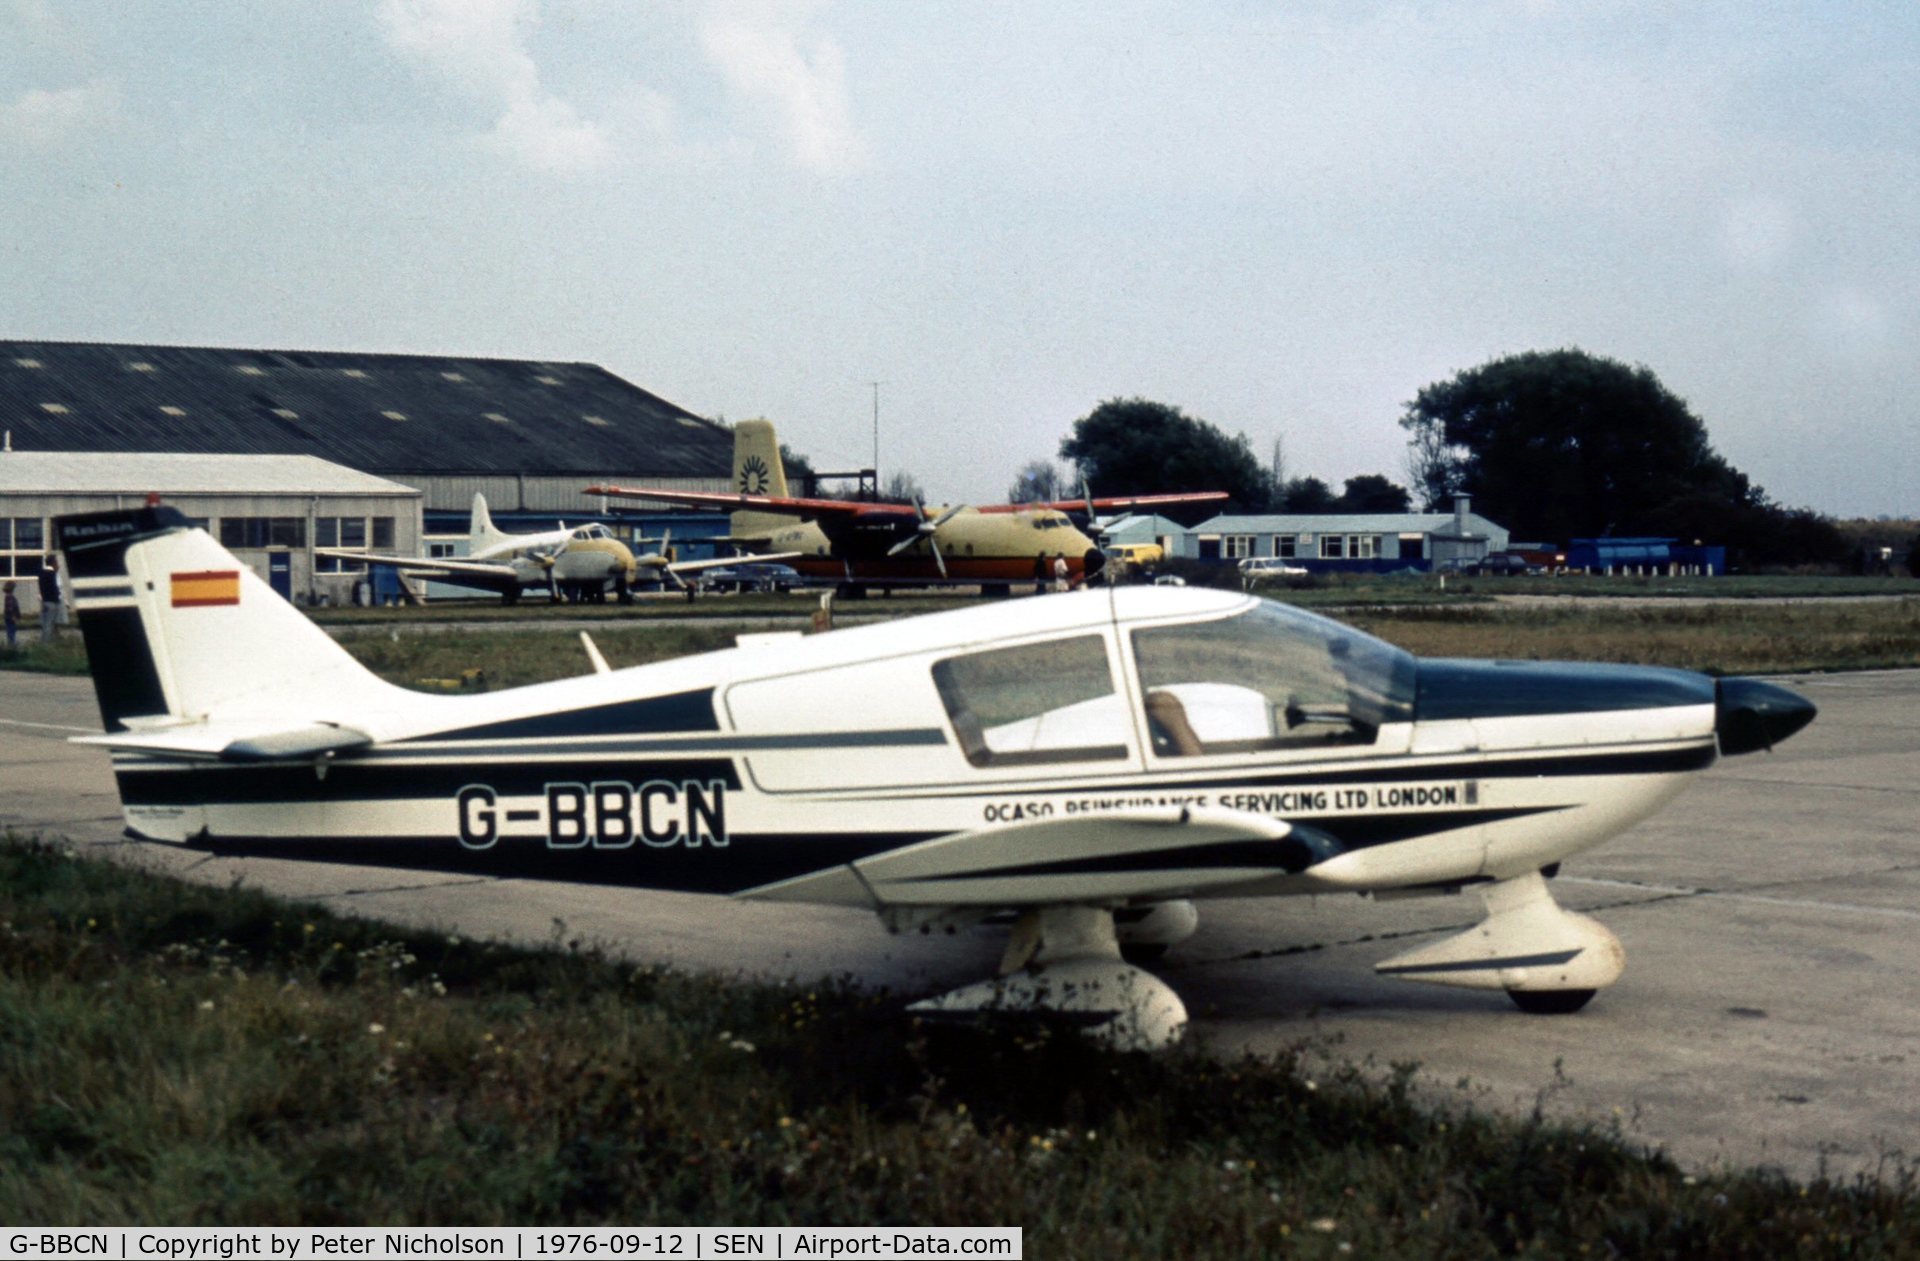 G-BBCN, 1973 Robin HR-100-210 Safari C/N 168, This Robin was seen at Southend in the Summer of 1976.